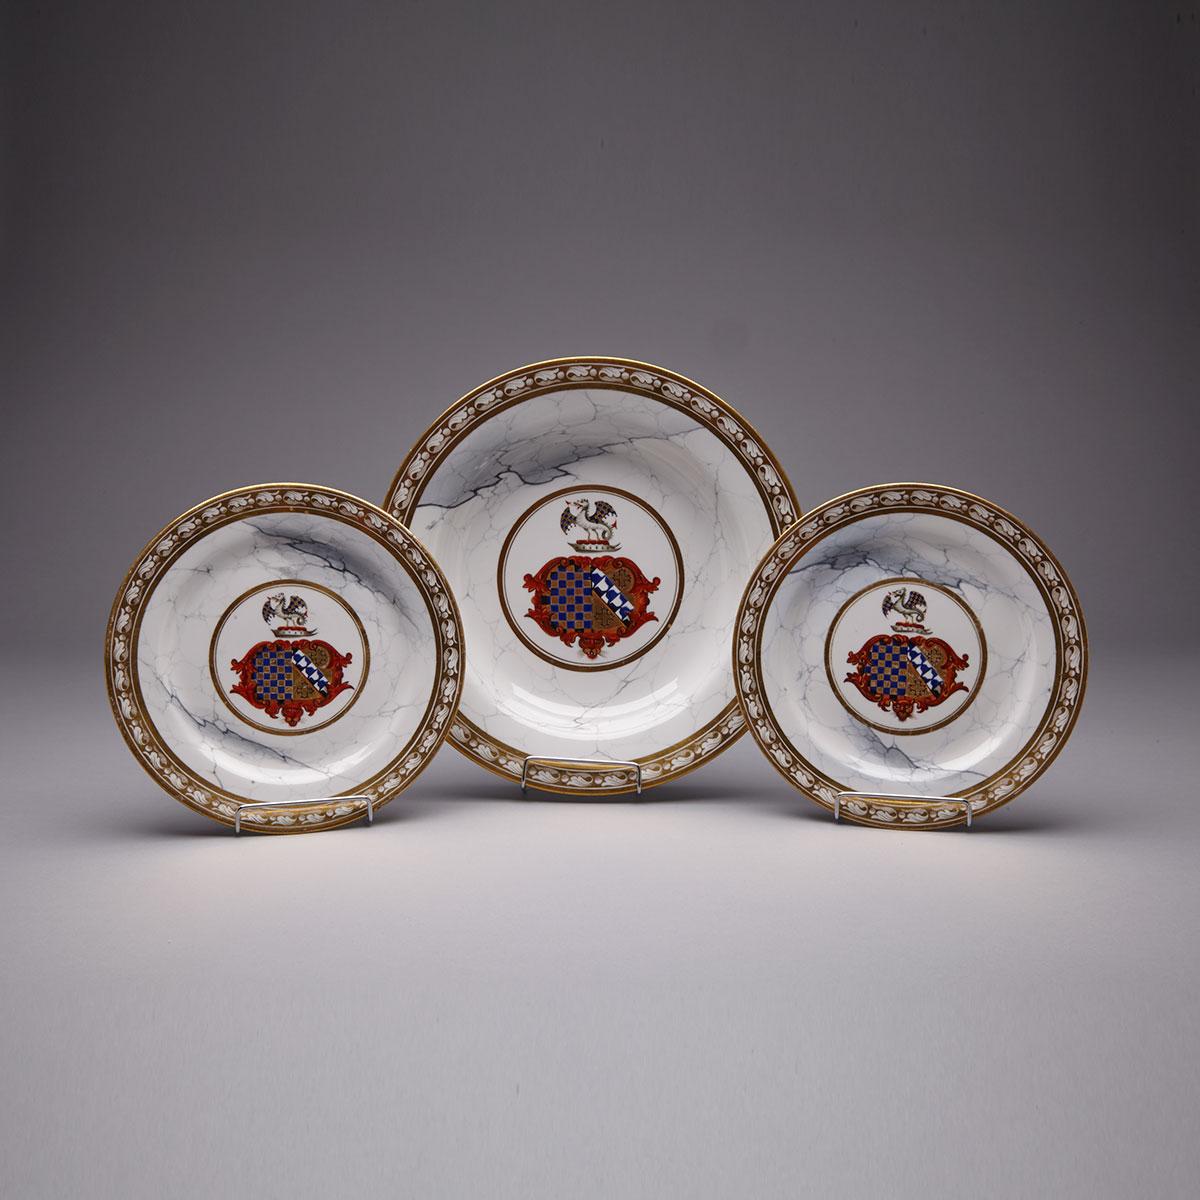 Pair of Barr, Flight & Barr Worcester Grey Marbled Ground Armorial Dessert Plates and a Soup Plate, c.1804-13